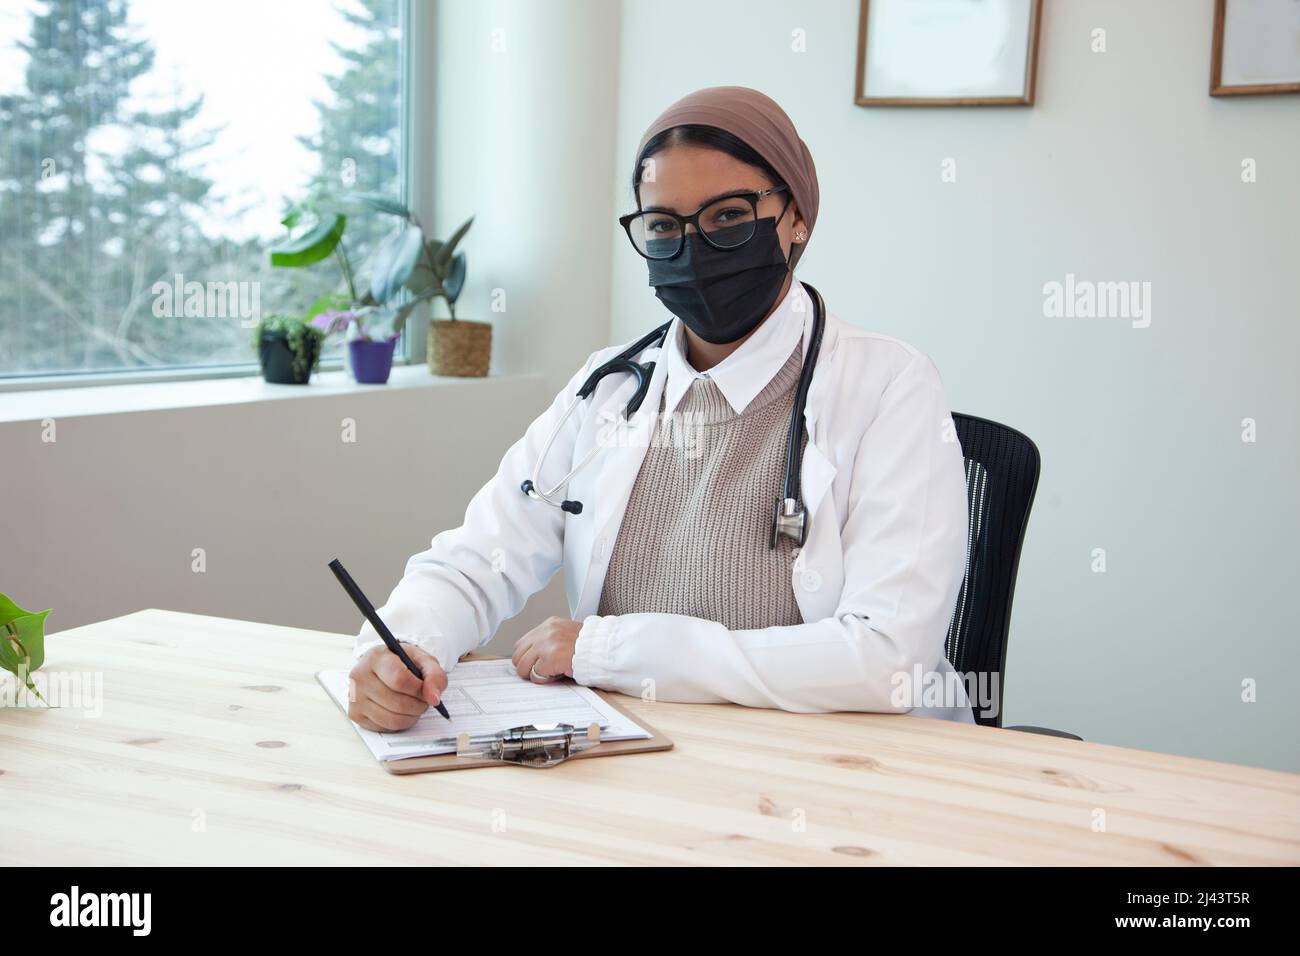 doctor with a hijab stethascope and mask at work in a medical clinic Stock Photo